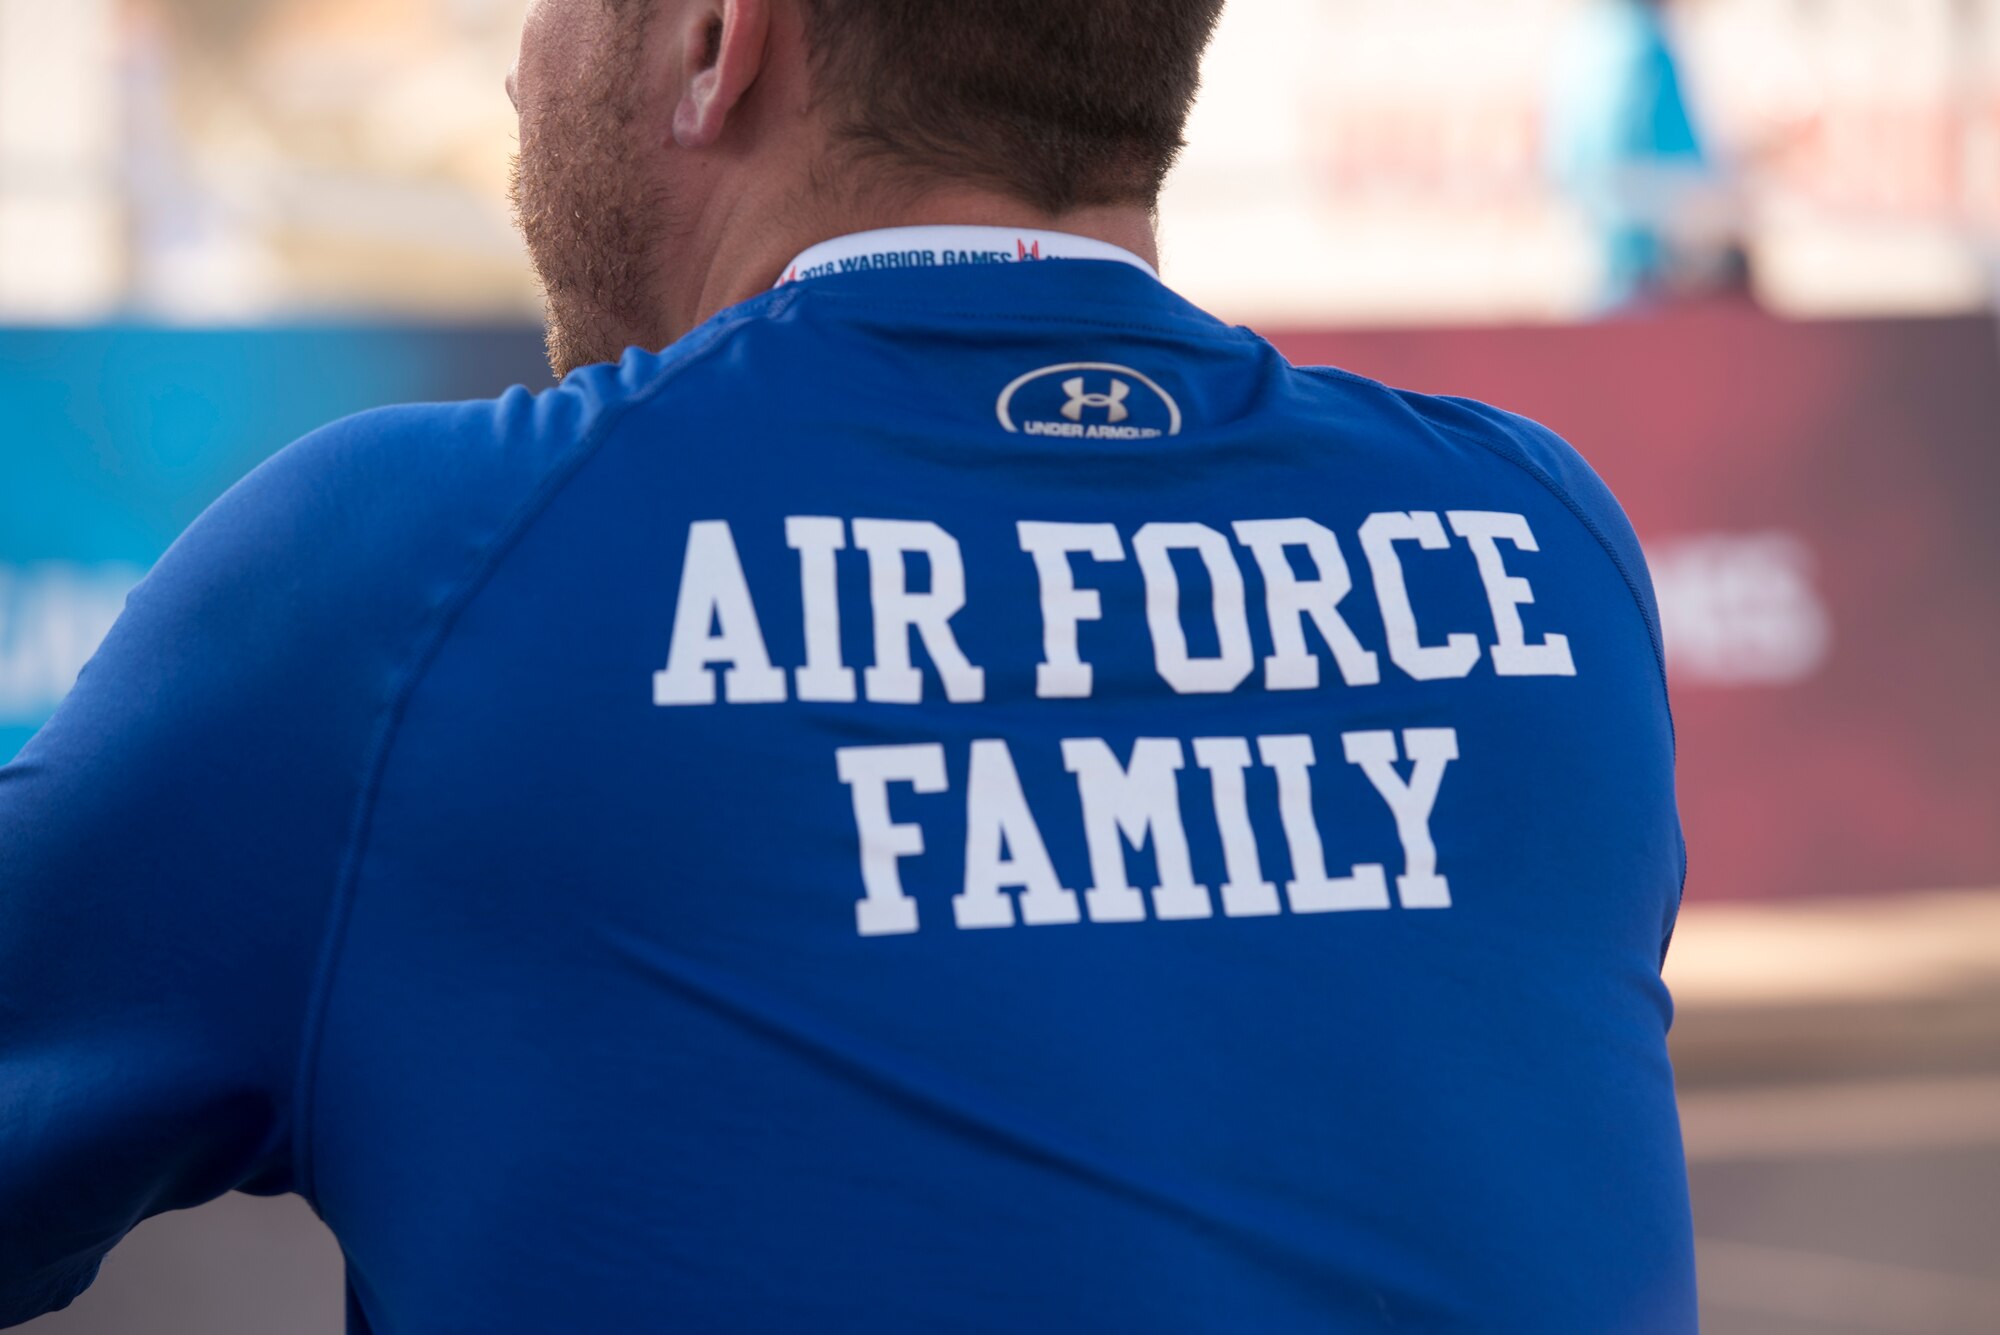 Tech. Sgt. Justin Goad, 49th Security Forces flight sergeant, watches the 2018 Department of Defense Warrior Games at the U.S. Air Force Academy in Colorado Springs, Colo. on June 6, 2018. His wife, Master Sgt. Lisa Goad, was one of the 40 athletes competing for Team Air Force. The Warrior Games were established in 2010 to enhance the recovery and rehabilitation of wounded, ill and injured service members through adaptive sports. (Courtesy photo)